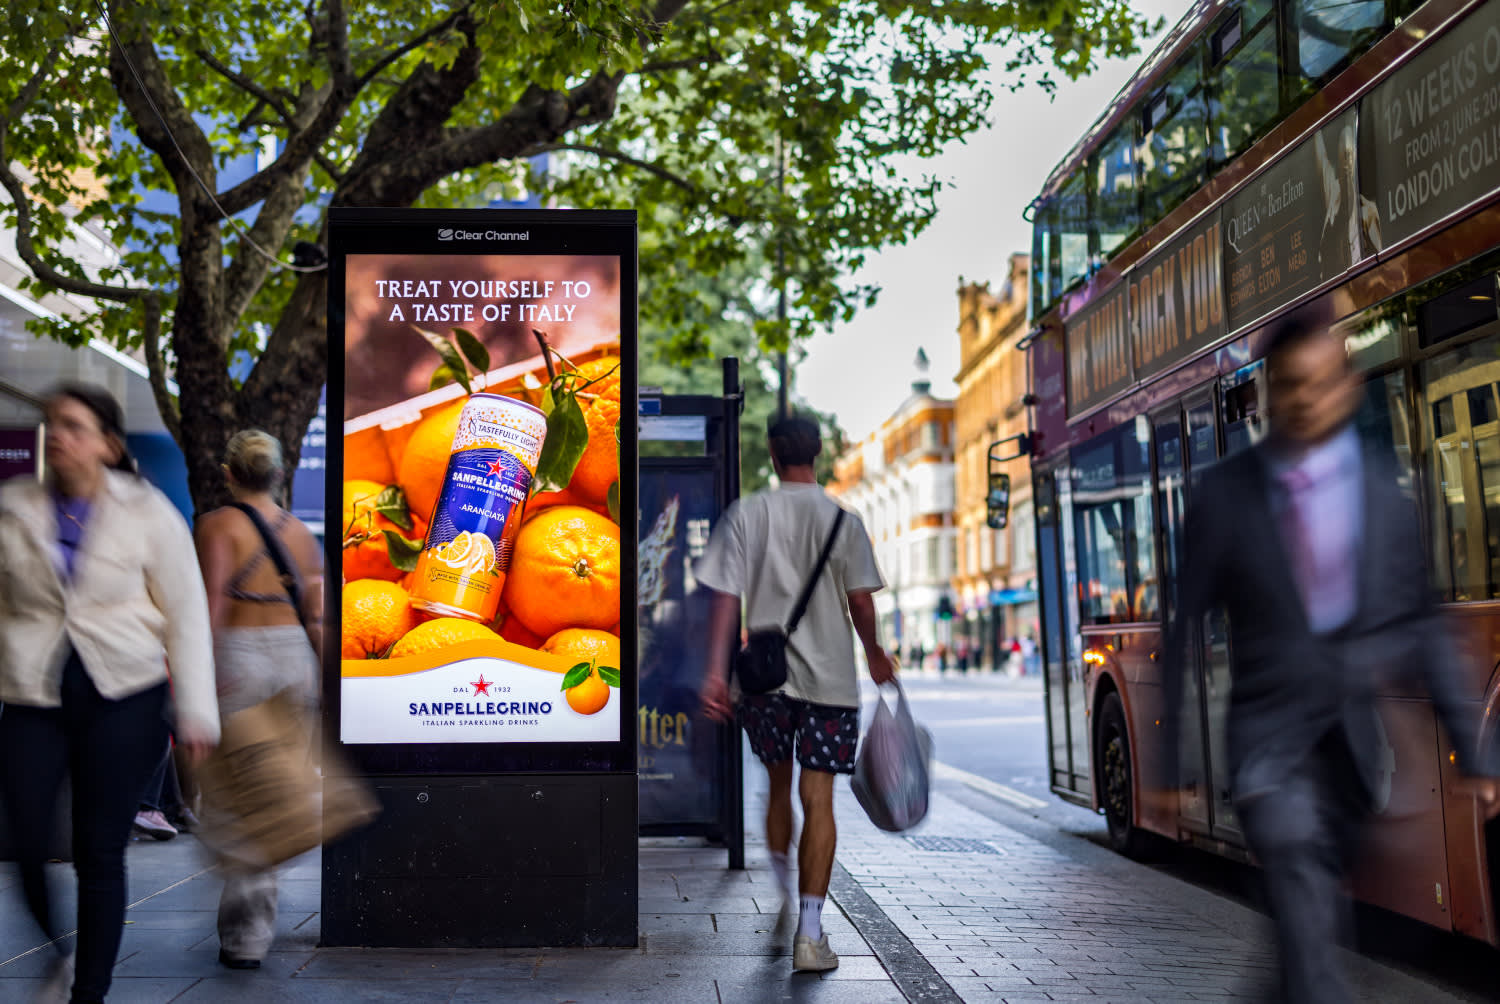 An Adshel Live screen displaying a Nestle campaign with a bus and people nearby